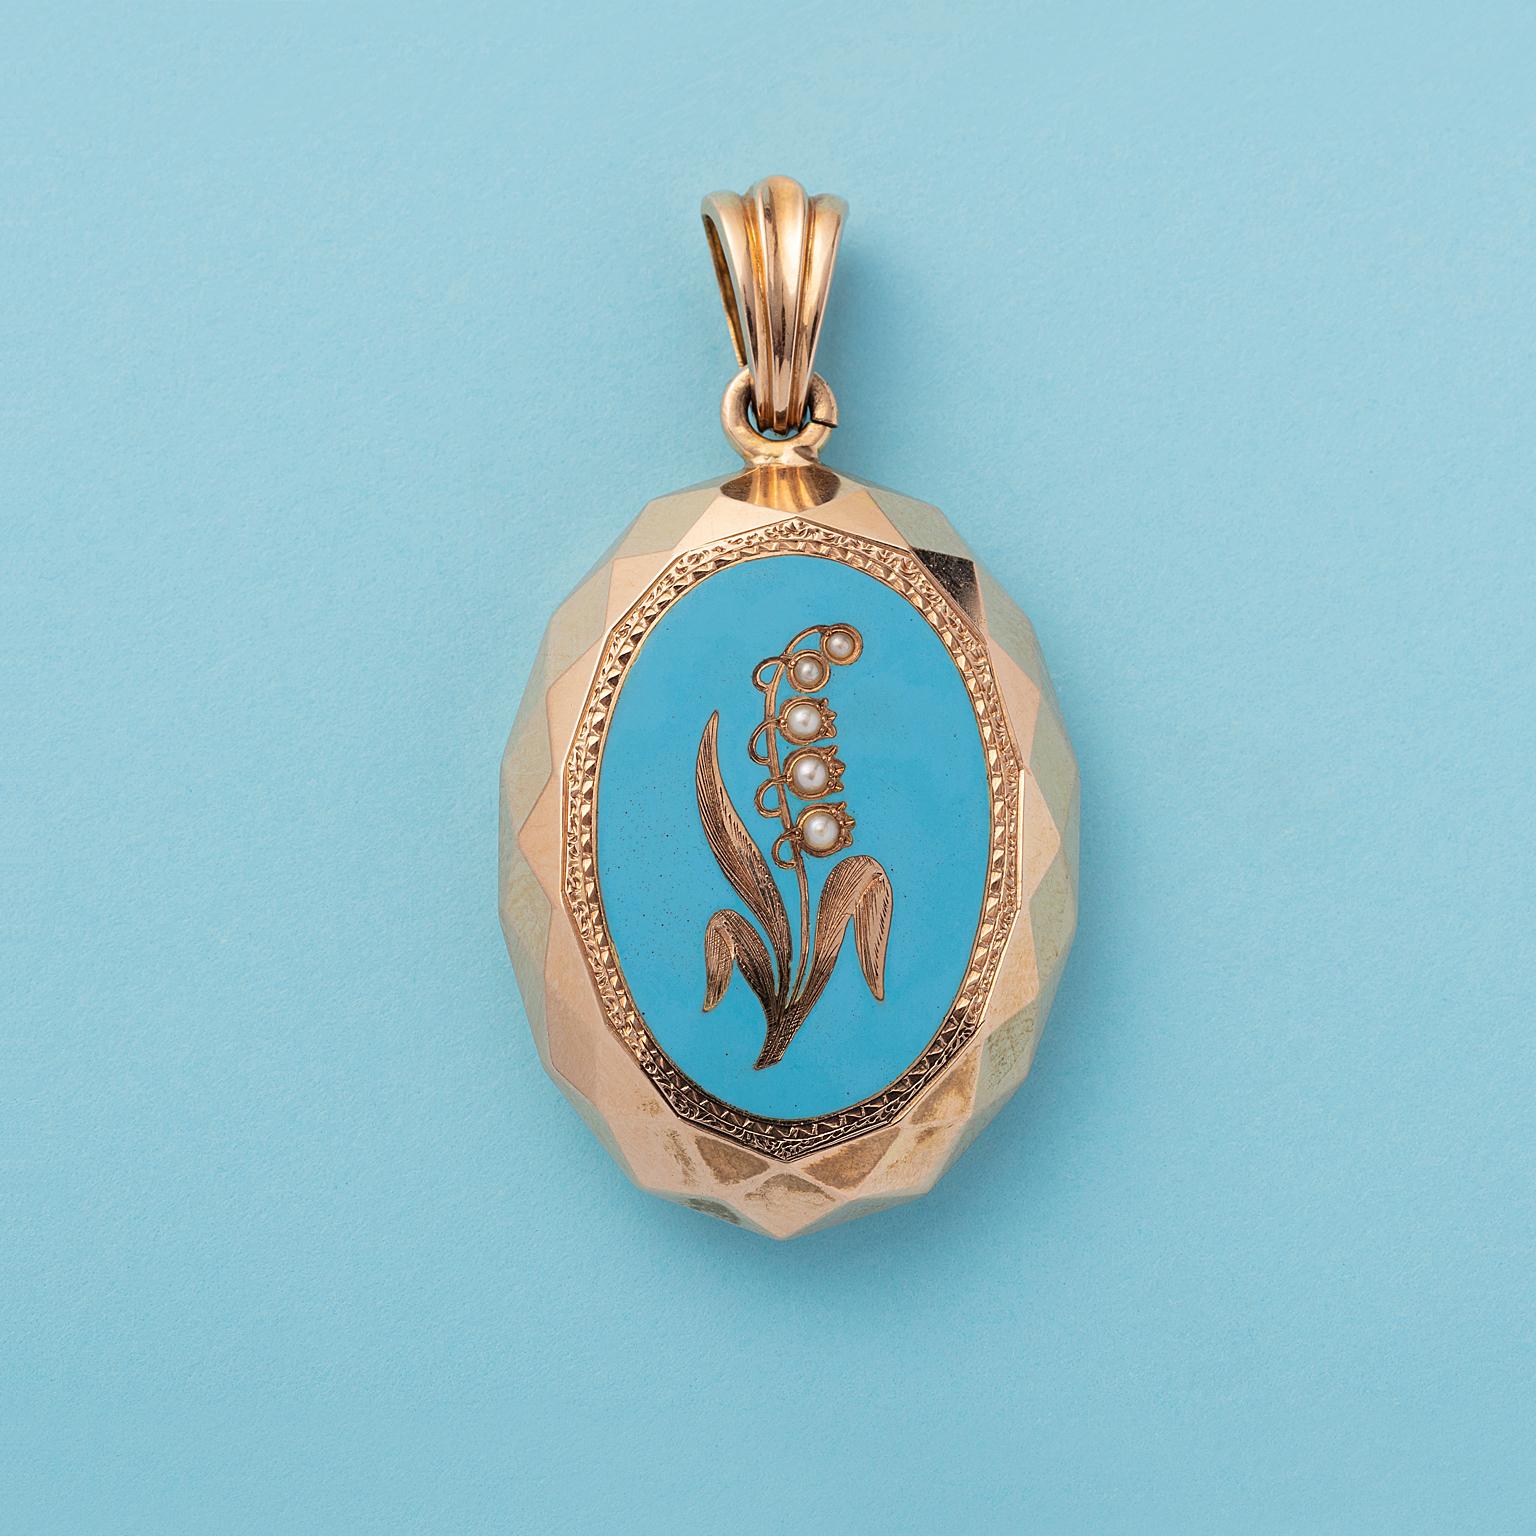 A 14 carat gold locket with a facetted gold border and blue enamel engraved with lily-of-the-Valley set with pearls in the flowers and one glassed compartment on the reverse, American, end 19th century.
 
weight: 8.94 grams
dimensions: 5.2 x 3.8 cm 
